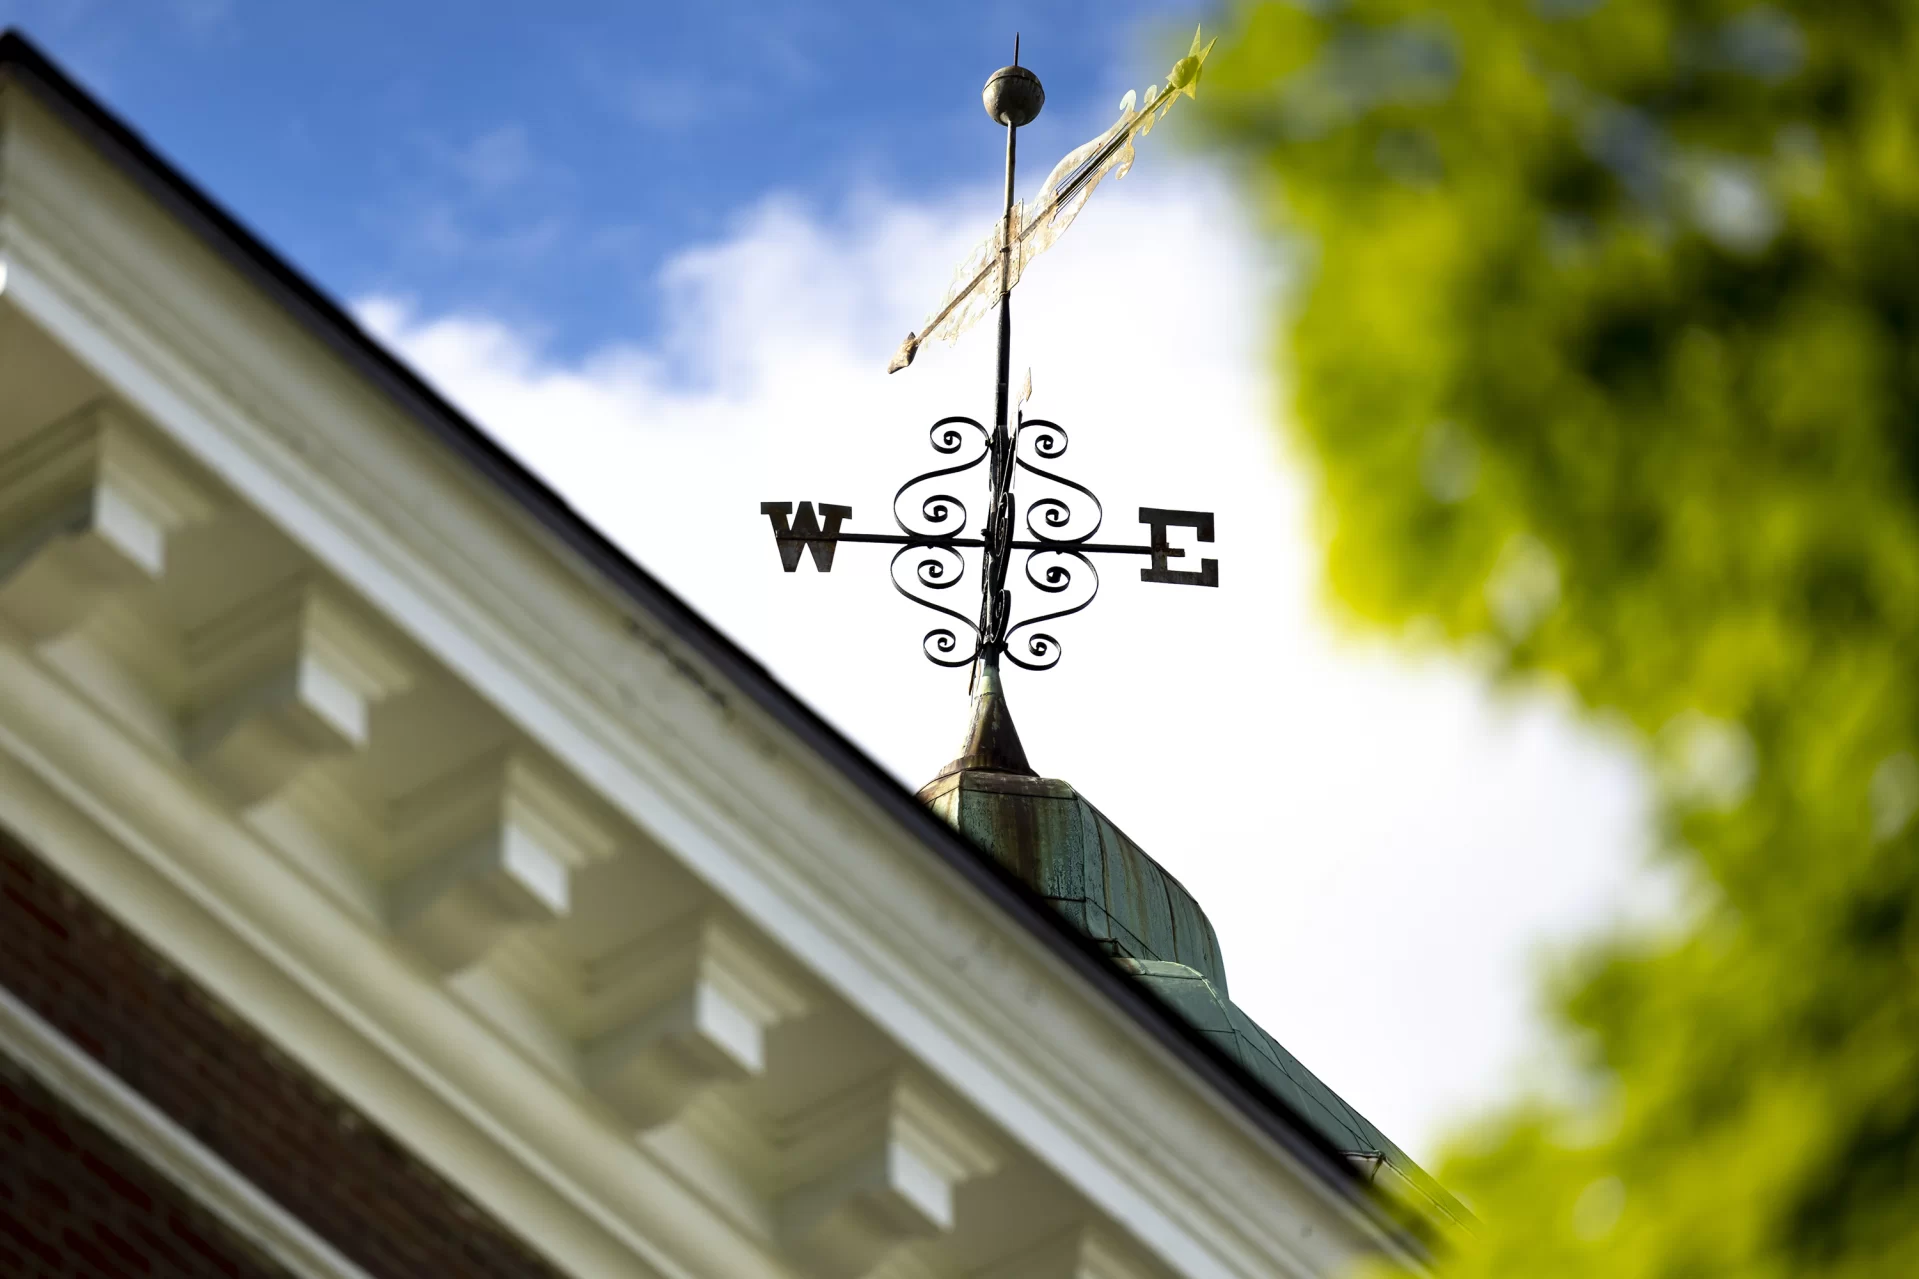 Scenes from early summer on the Bates campus

Hathorn Hall weathervane